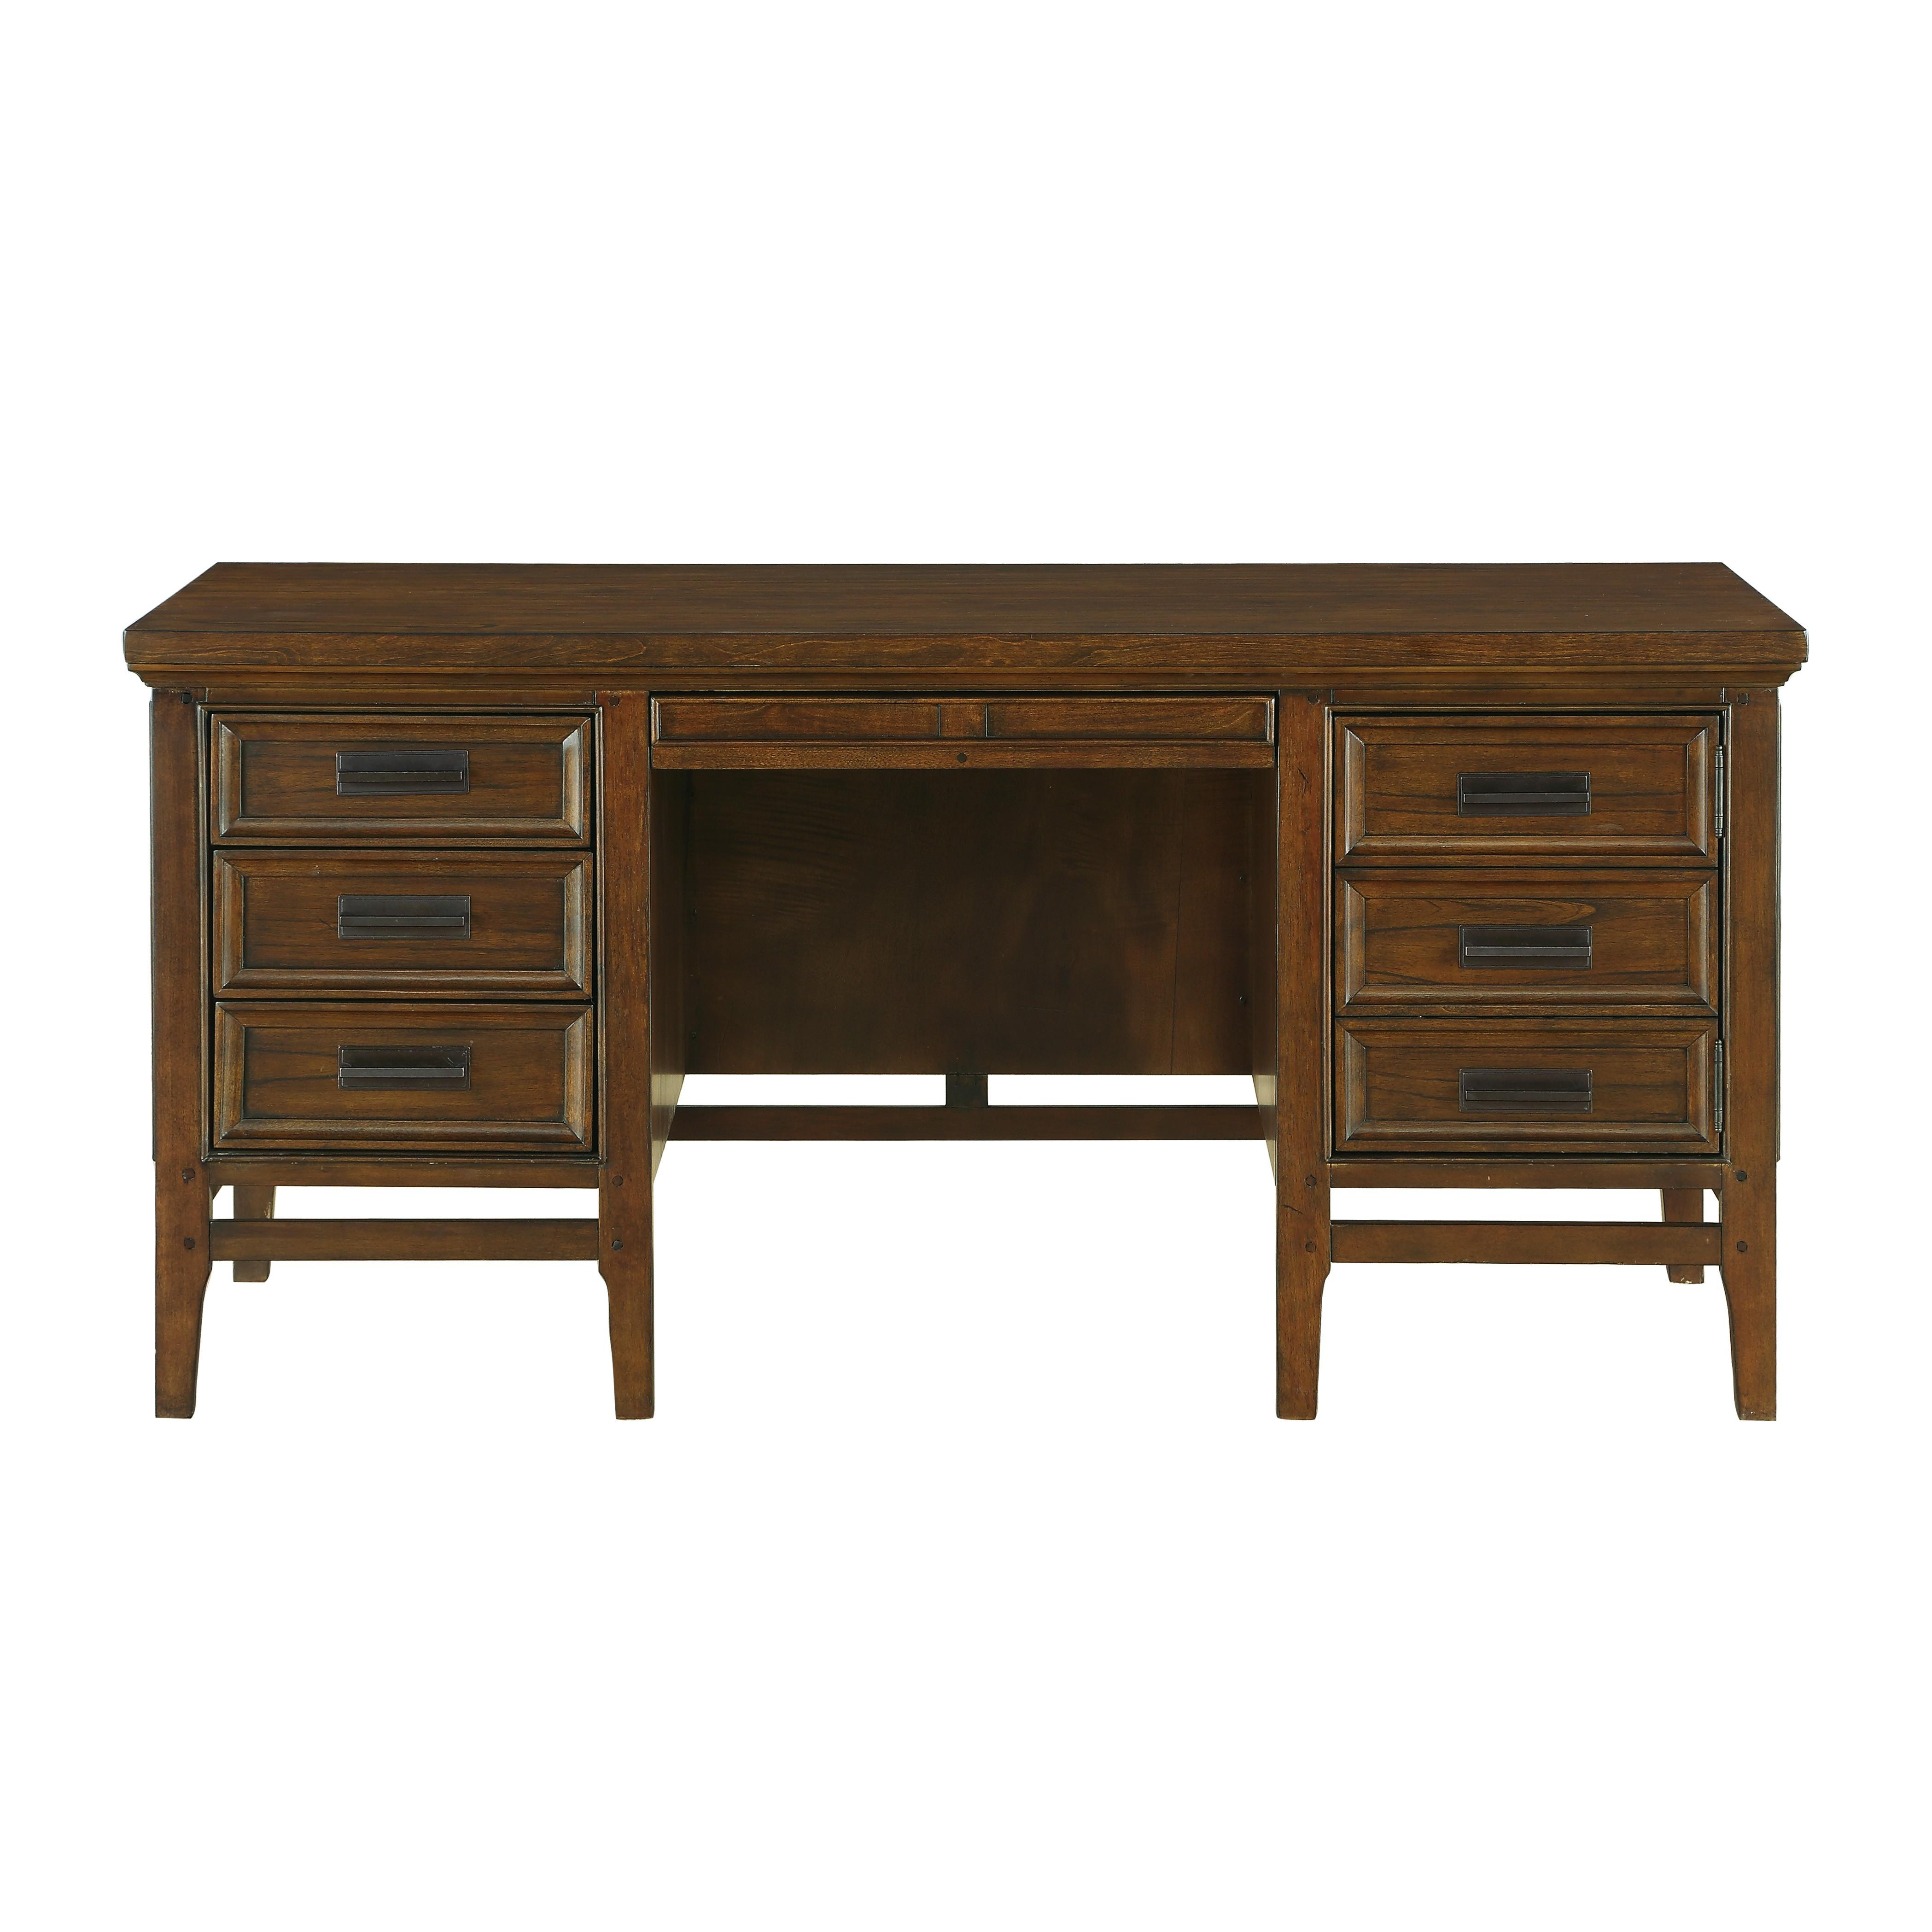 Traditional Executive Desk 1649-17 Frazier Park 1649-17 in Cherry 